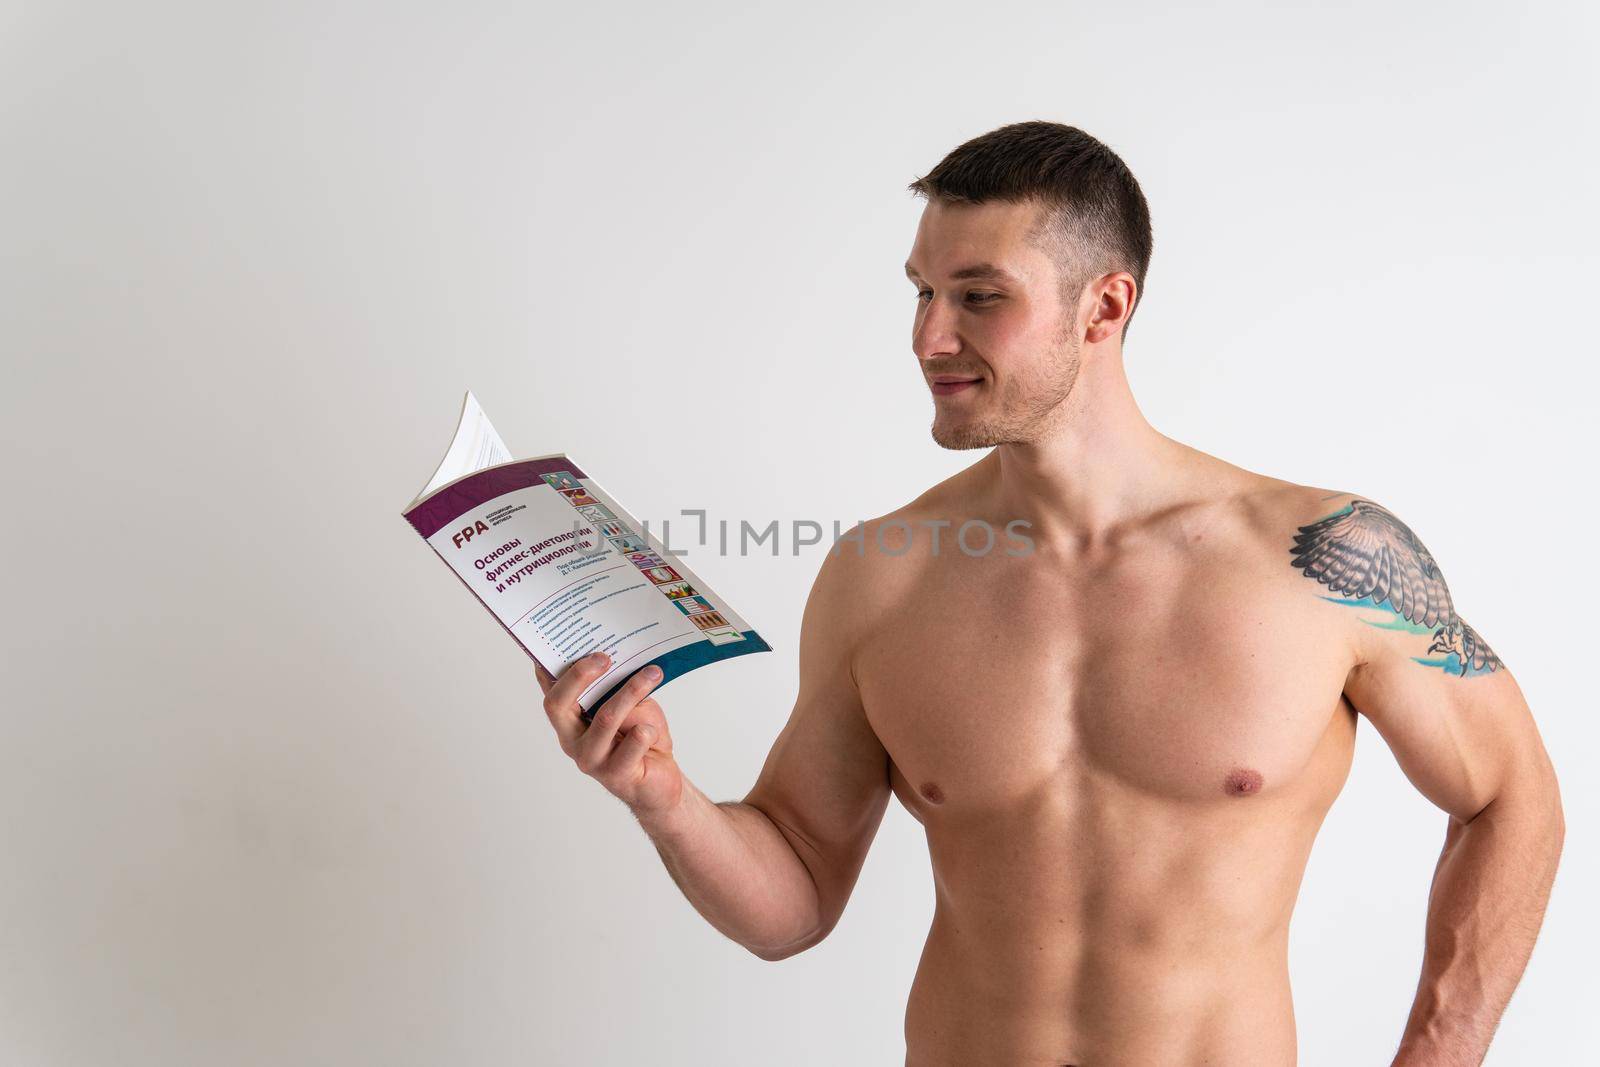 Bodybuilder reads the book on a white background isolated at the bottom of his head on his hands bodybuilder book muscular, muscle glasses bodybuilding chest shirtless, happy fit. ABS strength tan by 89167702191